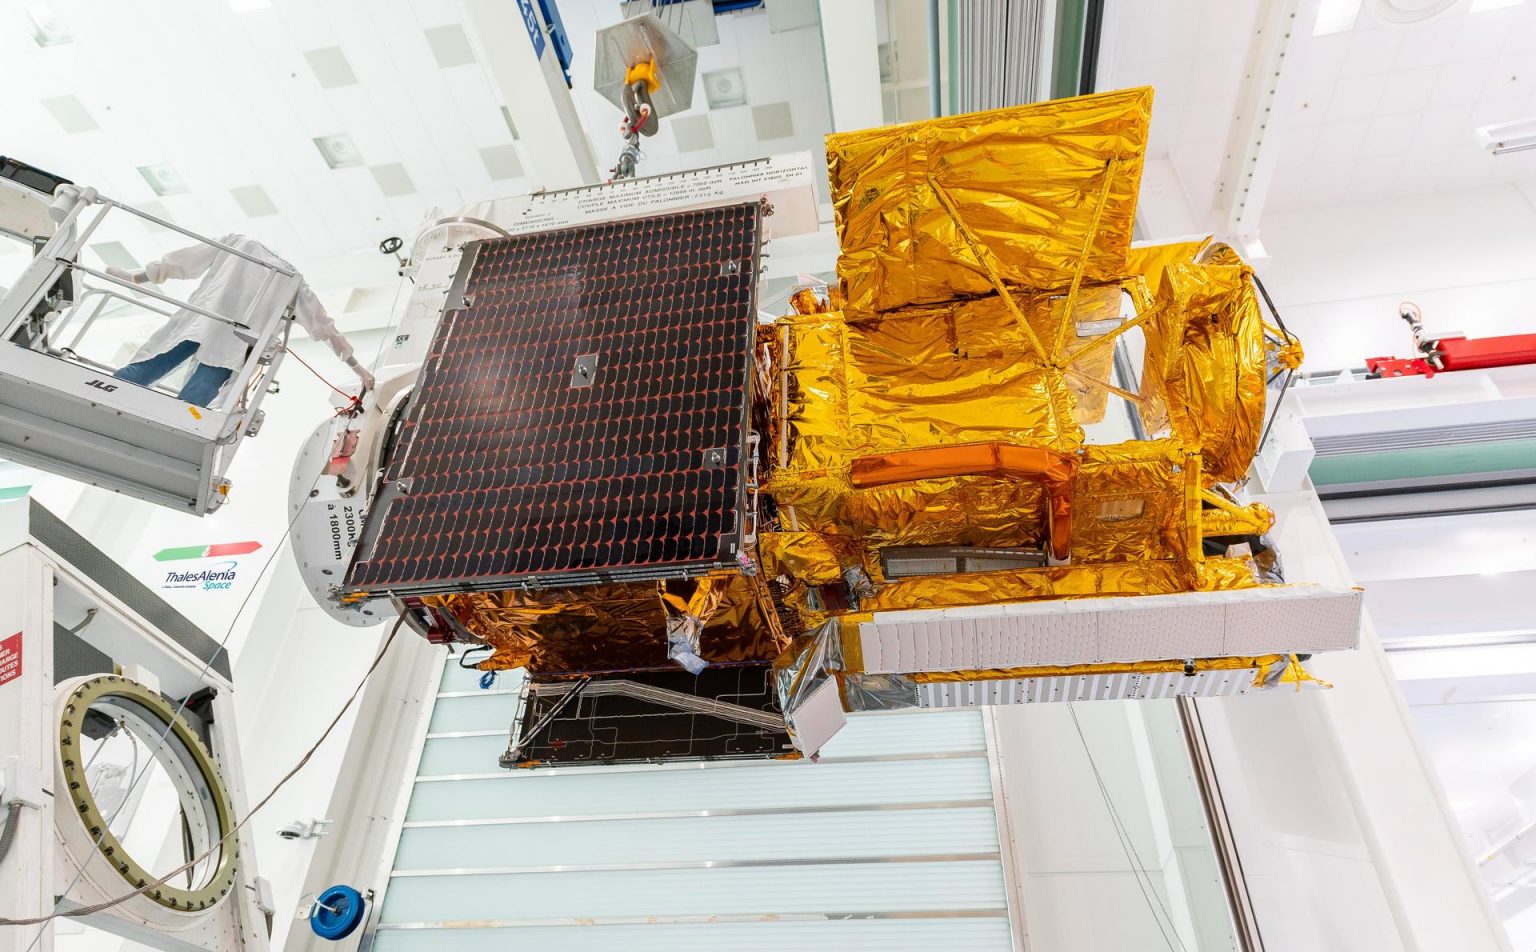 Workers in a clean room in Cannes, France, load the Surface Water and Ocean Topography (SWOT) satellite into a container in preparation for shipping the spacecraft to the U.S. Photo credit: CNES/Thales Alenia Space
